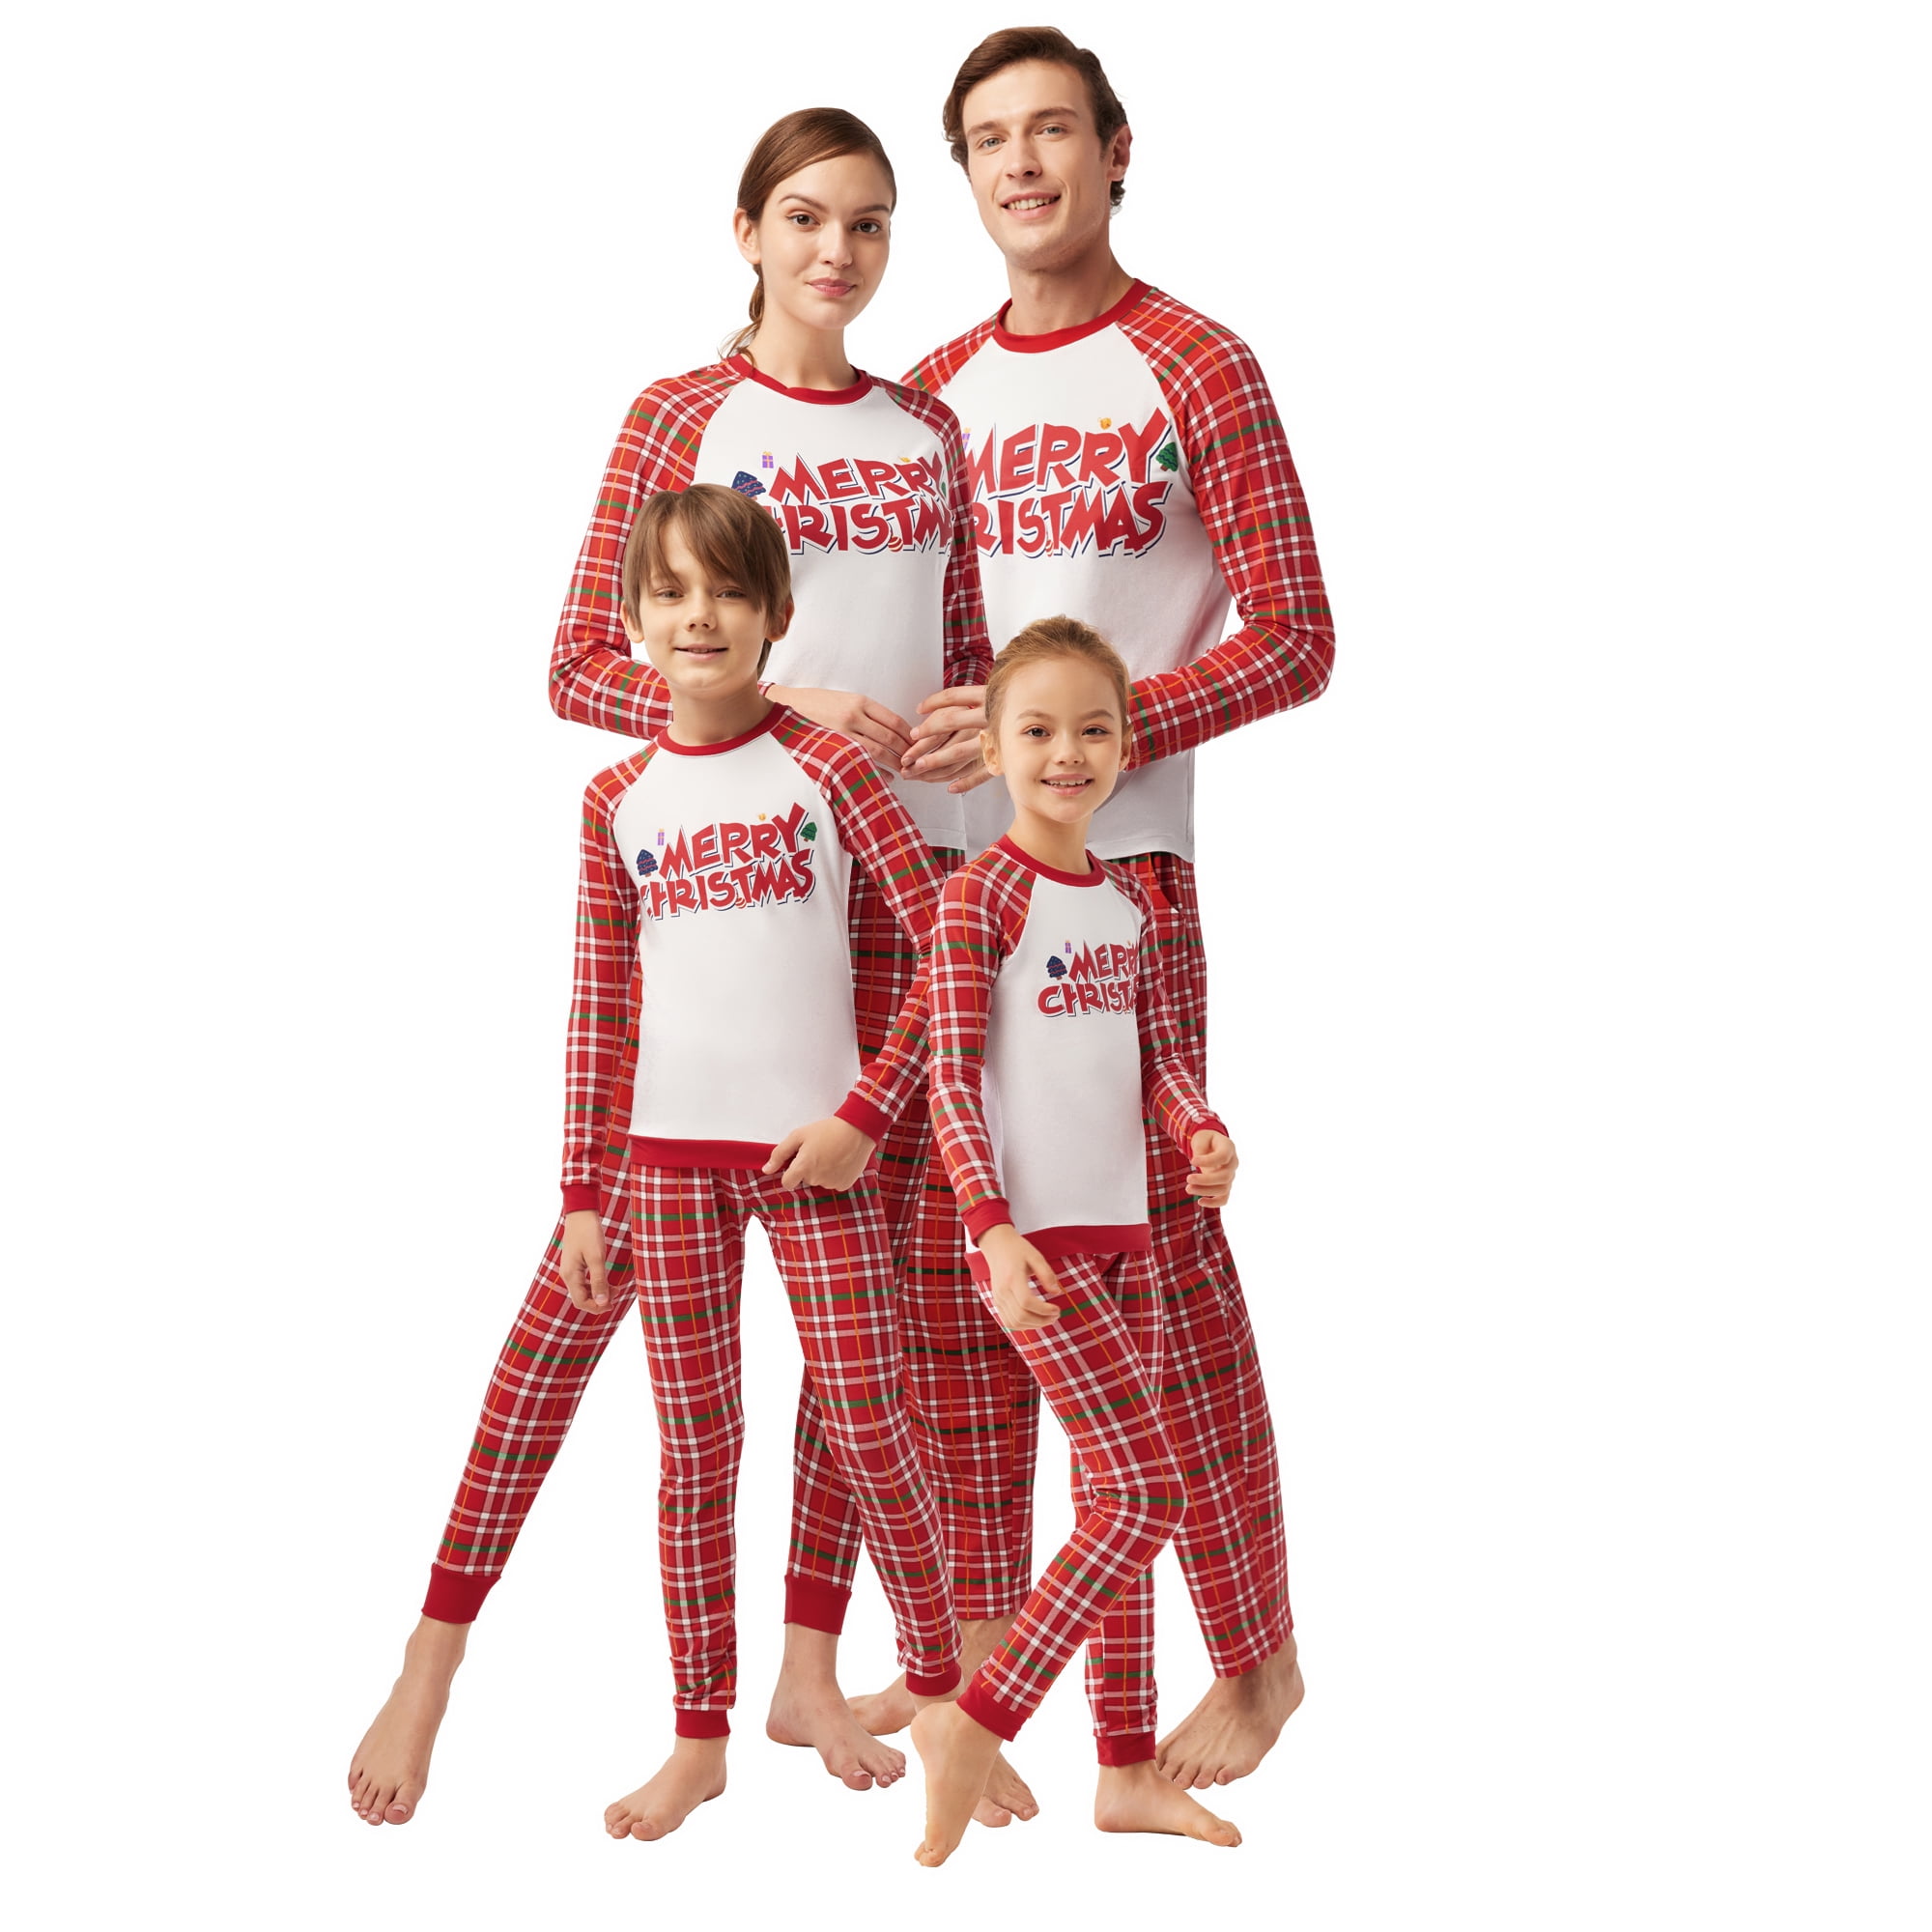 SIORO Matching Family Christmas Pajamas Set PJ's Sleepwear Letter Printed  Top with Plaid Bottom Kids, Red and white plaid, 13-14 Years